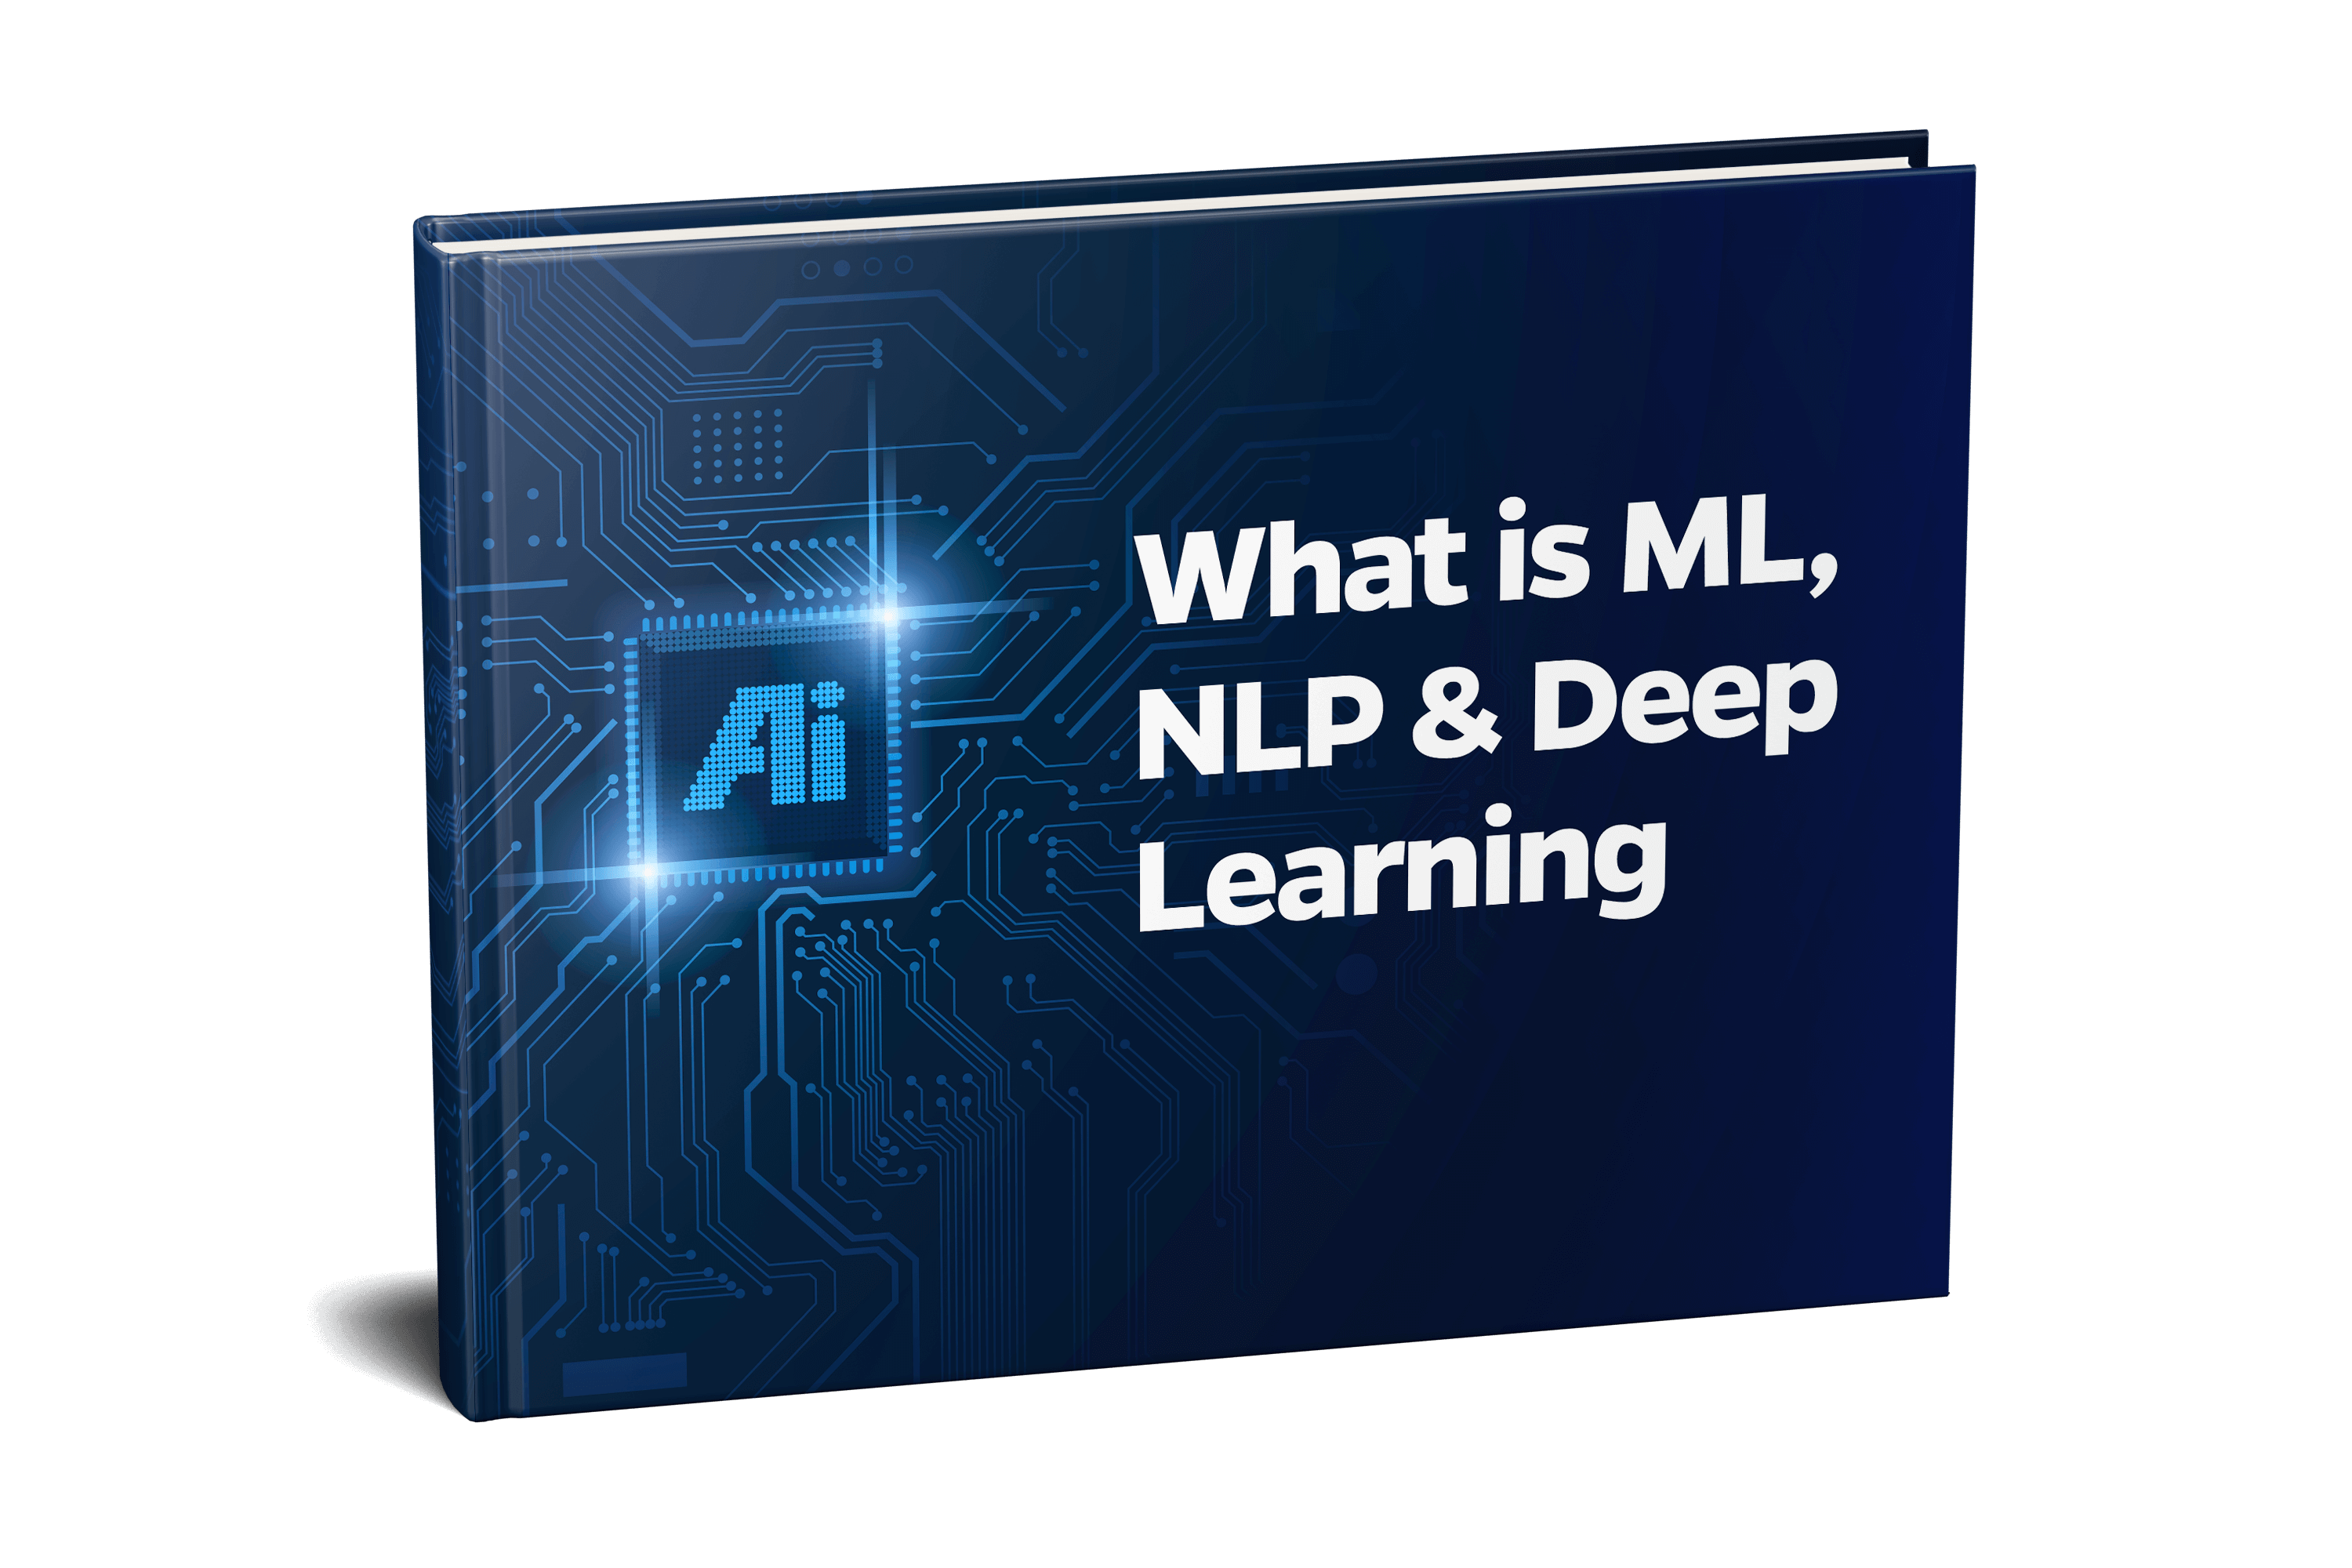 What is ML, NLP & Deep Learning